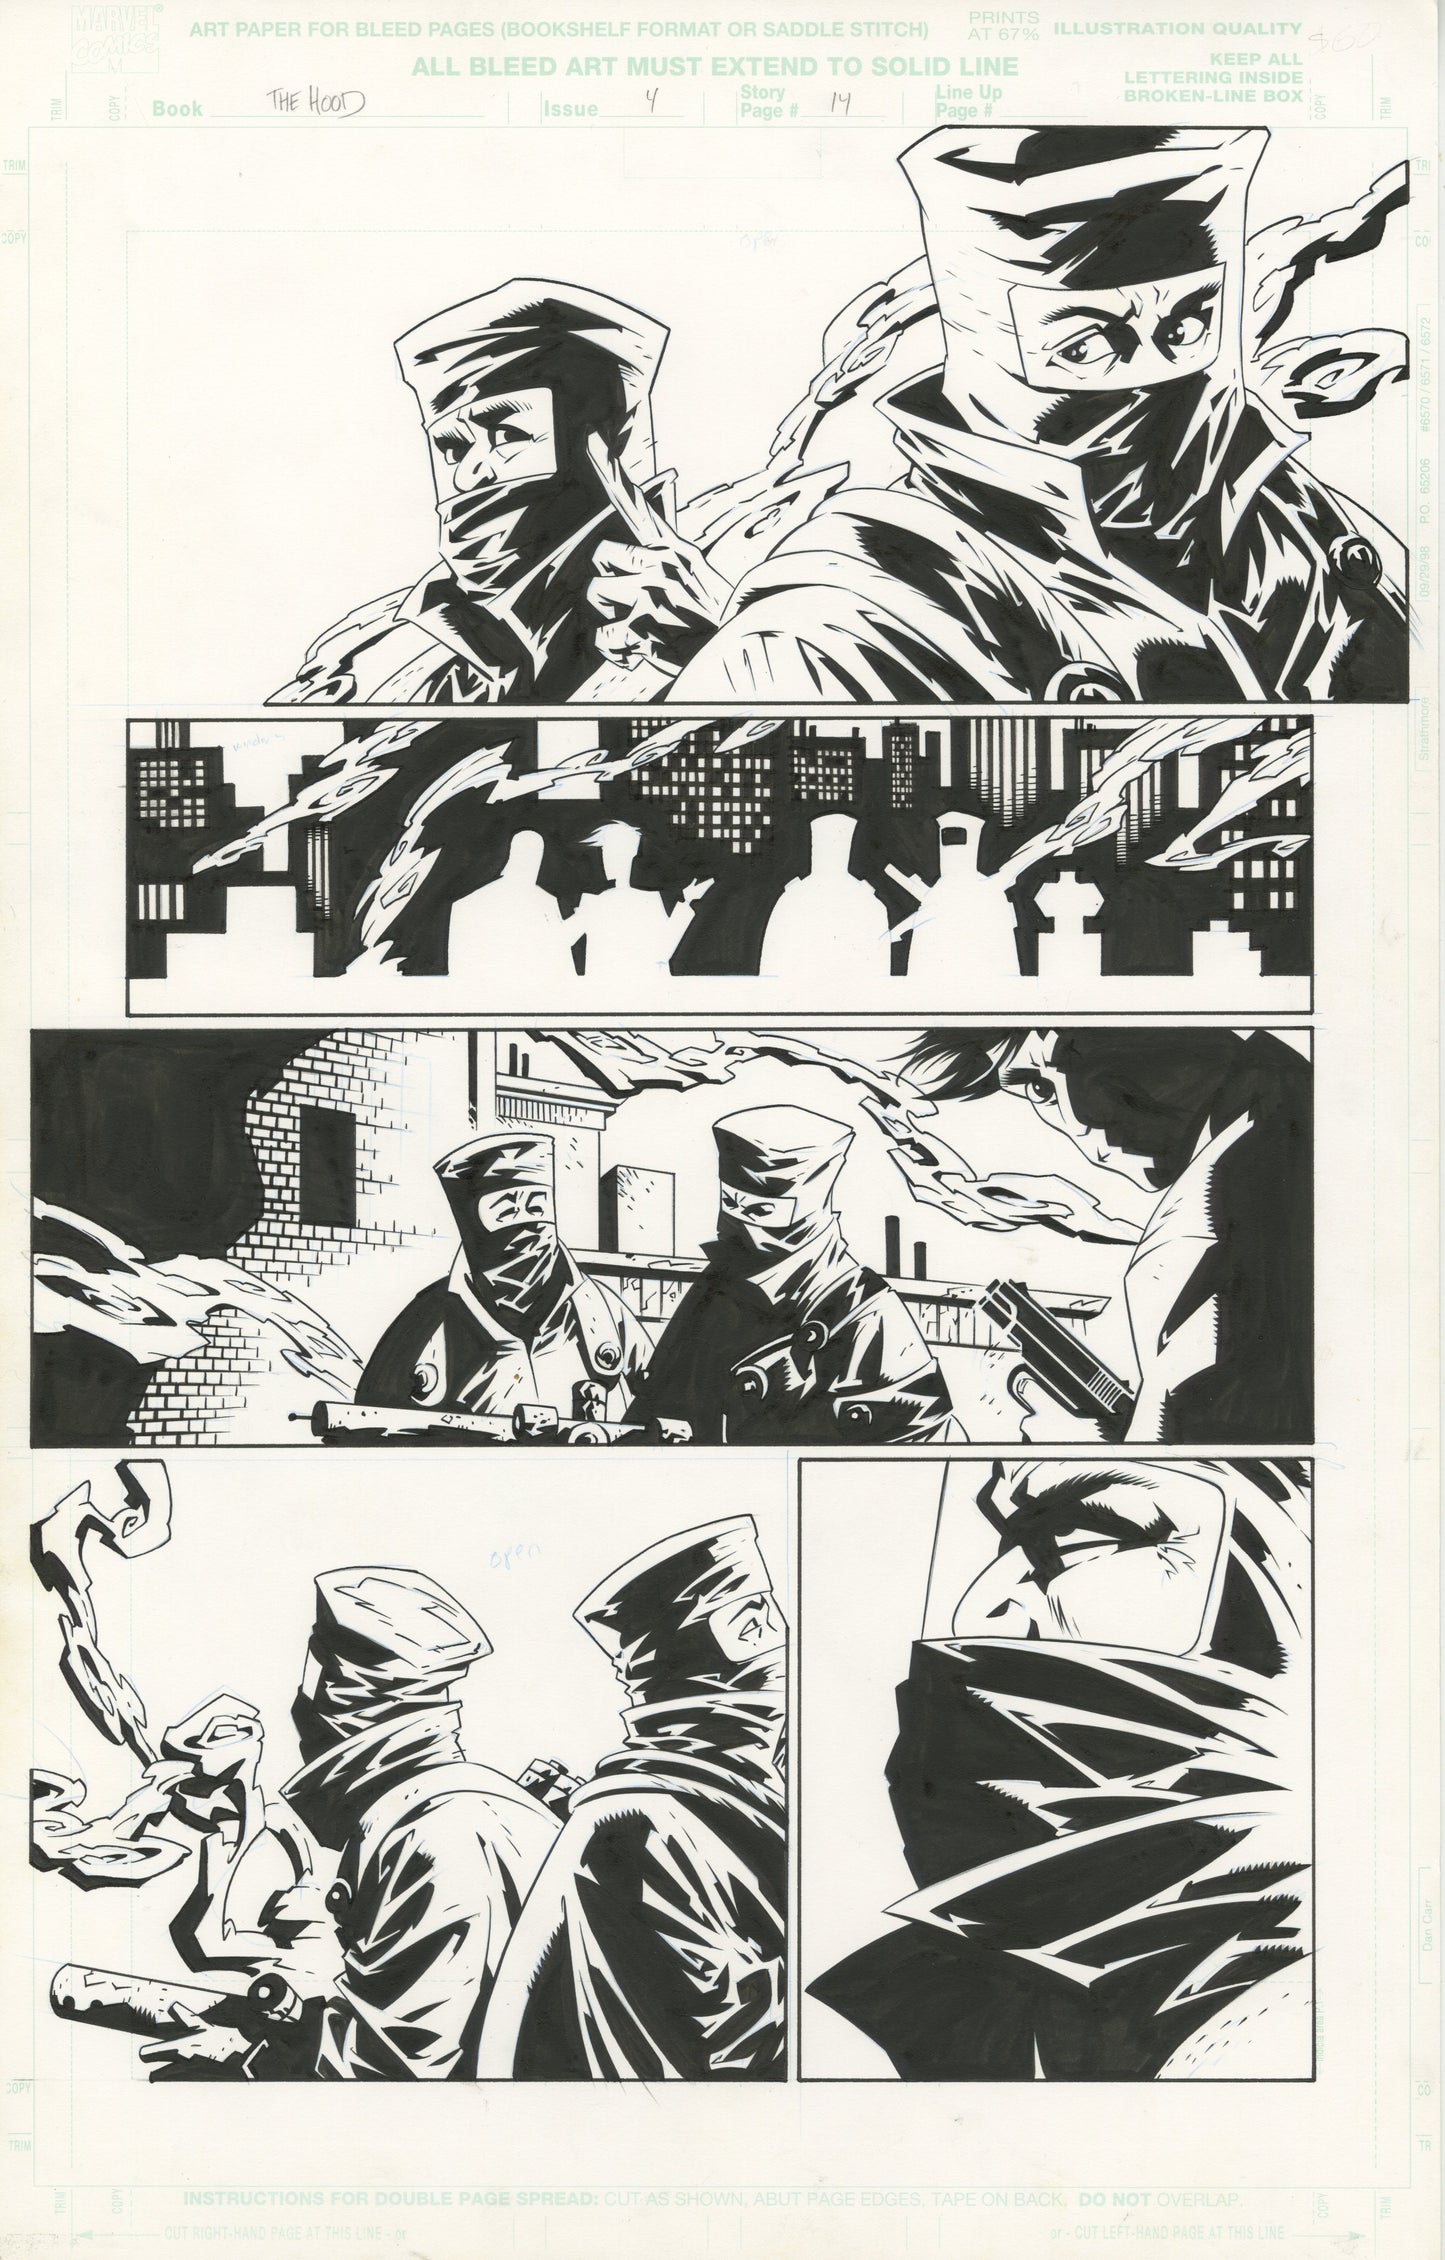 The Hood #04, page #14 (2002, Marvel)